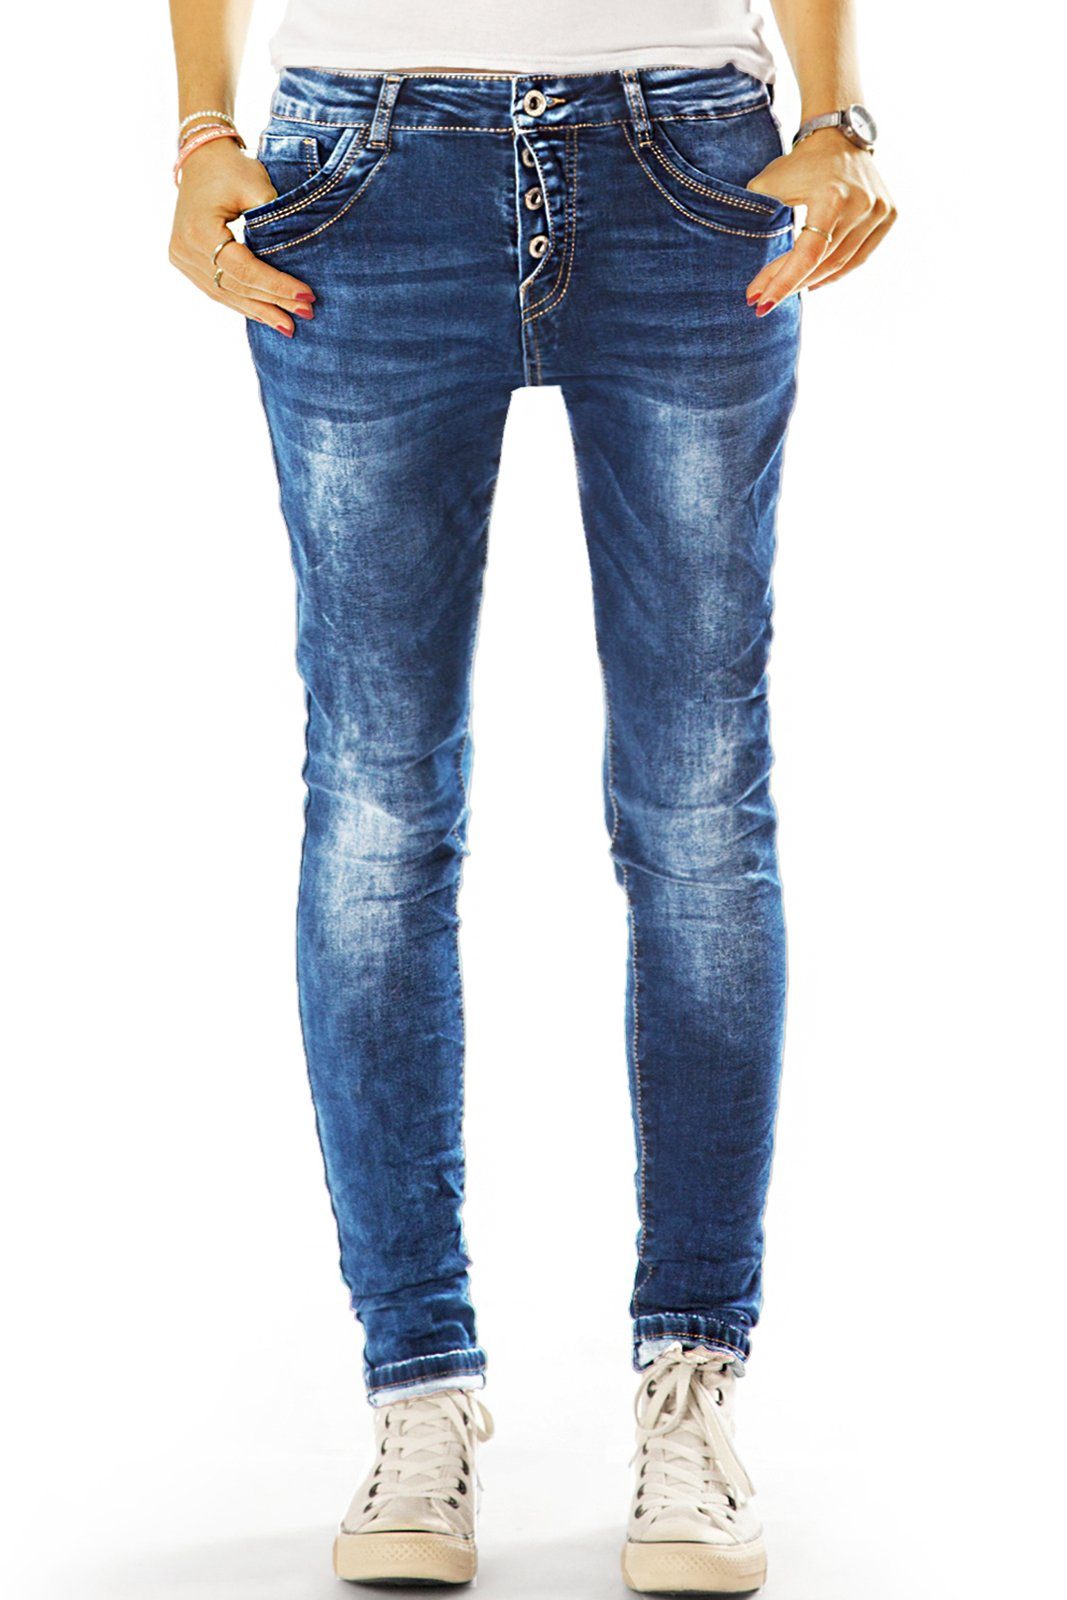 im Fit j4g-1 Look - Stretch-Anteil, Damen Hose Fit - Slim Hüftjeans be mit Relaxed styled 5-Pocket-Style Slim-fit-Jeans